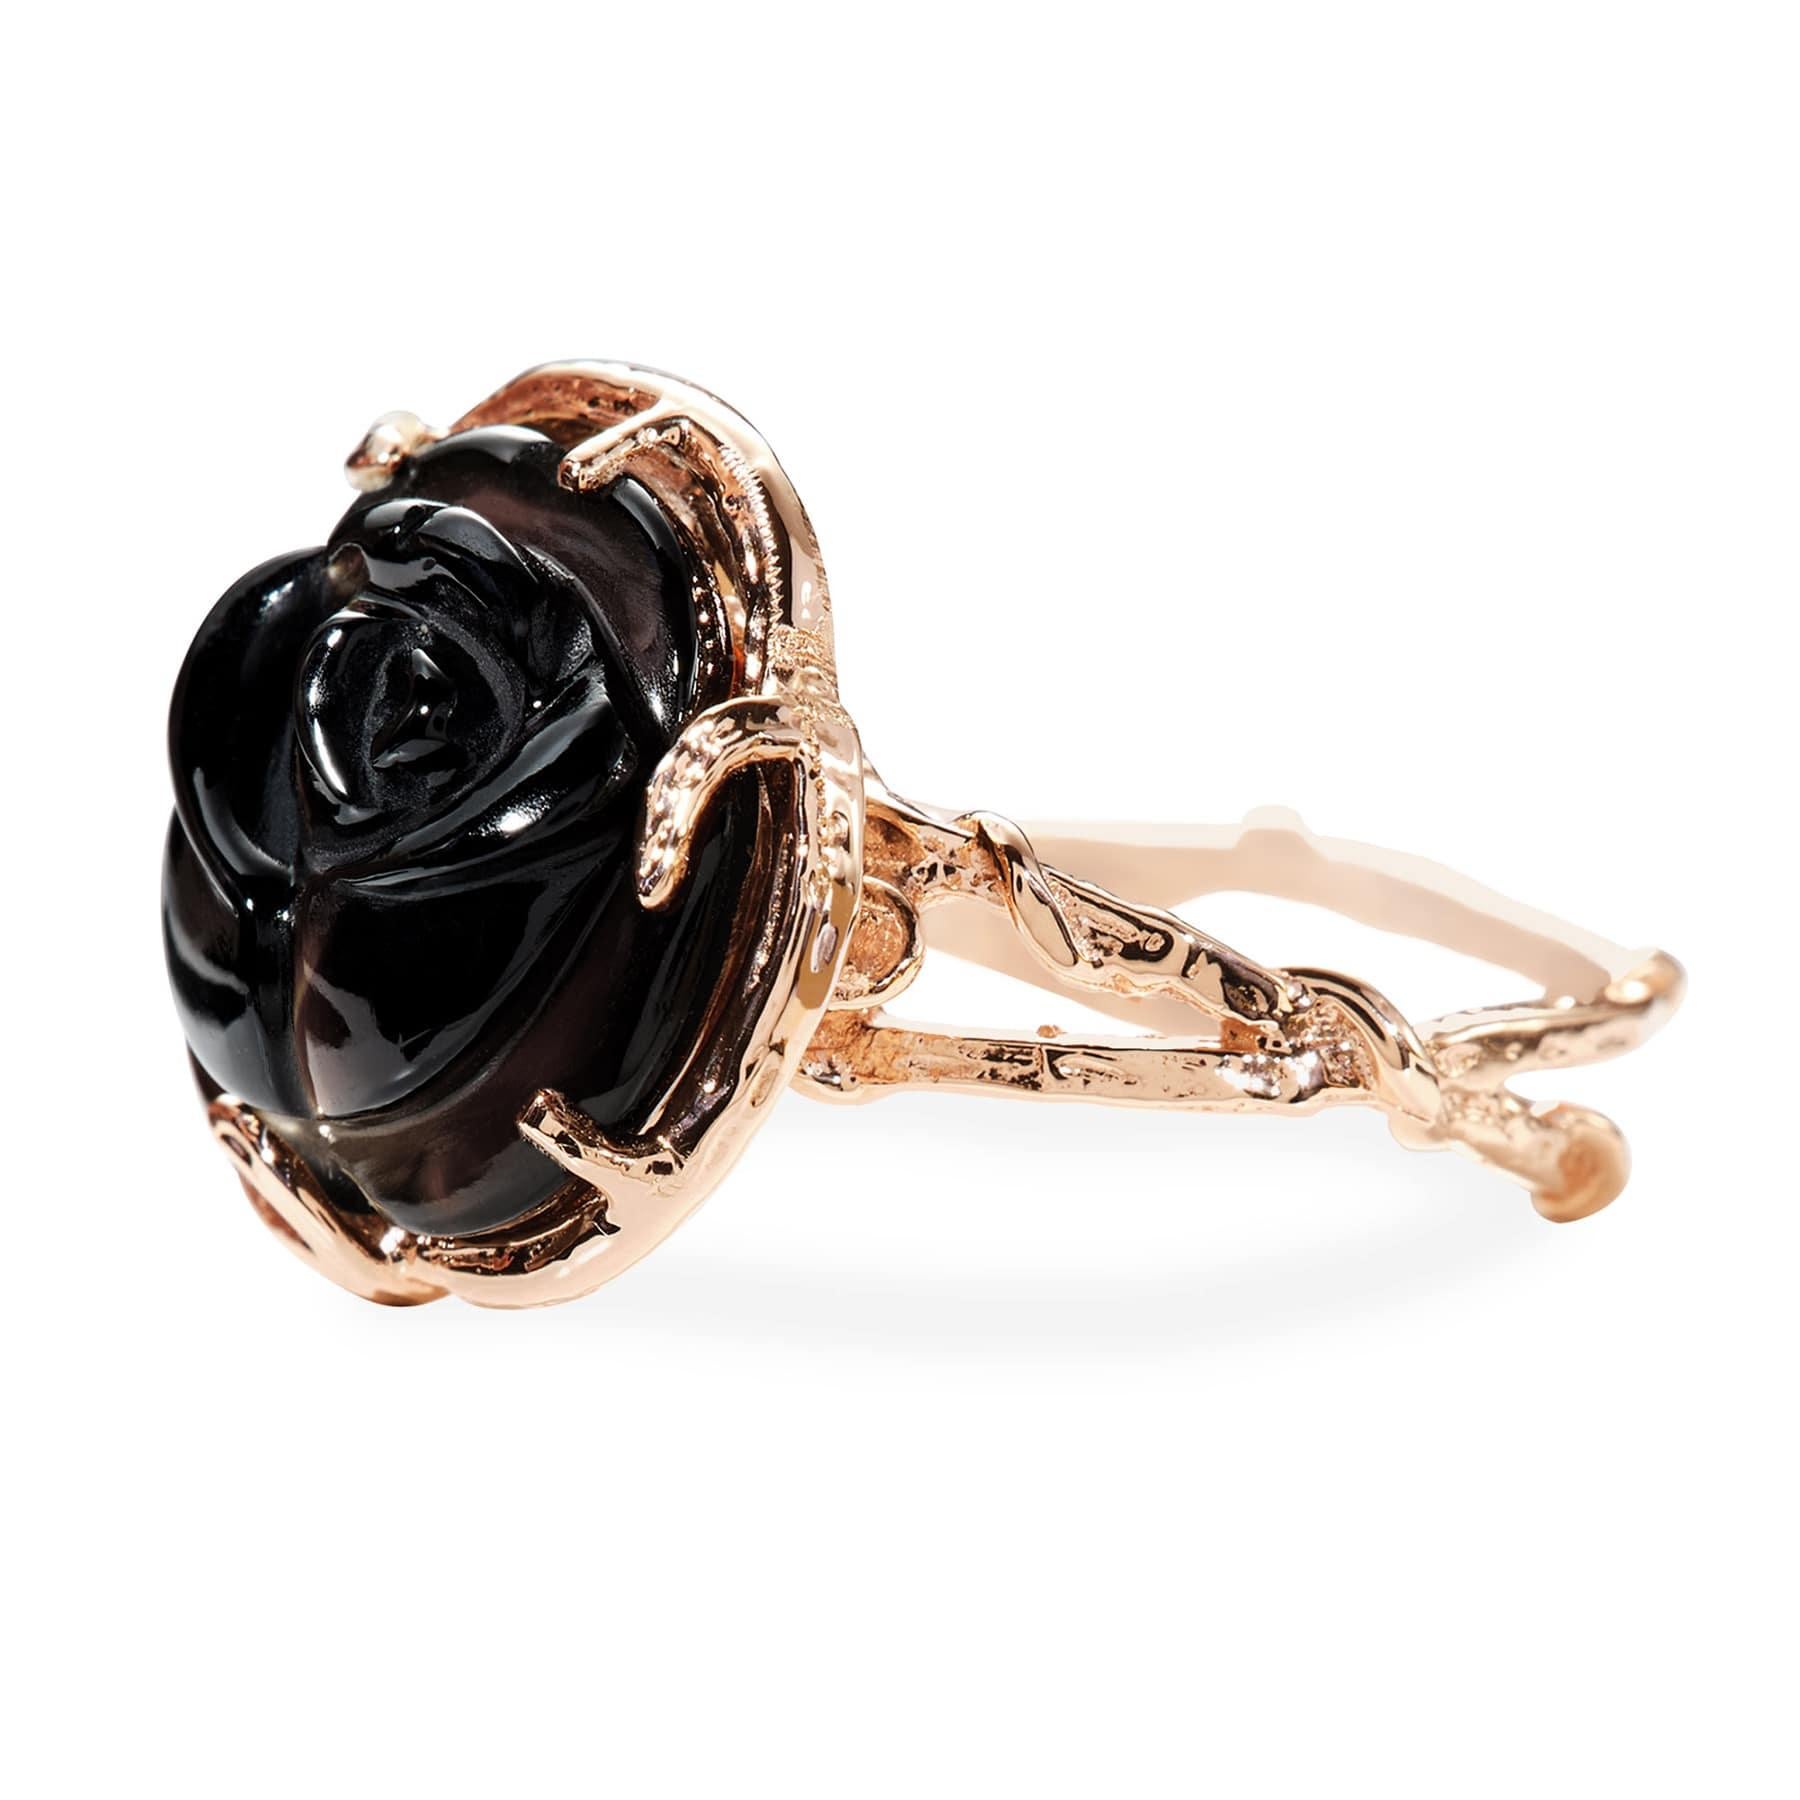 Beauty with a sense of danger, our poetic 14k Rose Gold Gabrielle Ring features a carved black onyx rosebud secured by thorny claws and centered on a double vine detailed band. This talismanic ring represents the strength and determination to dream